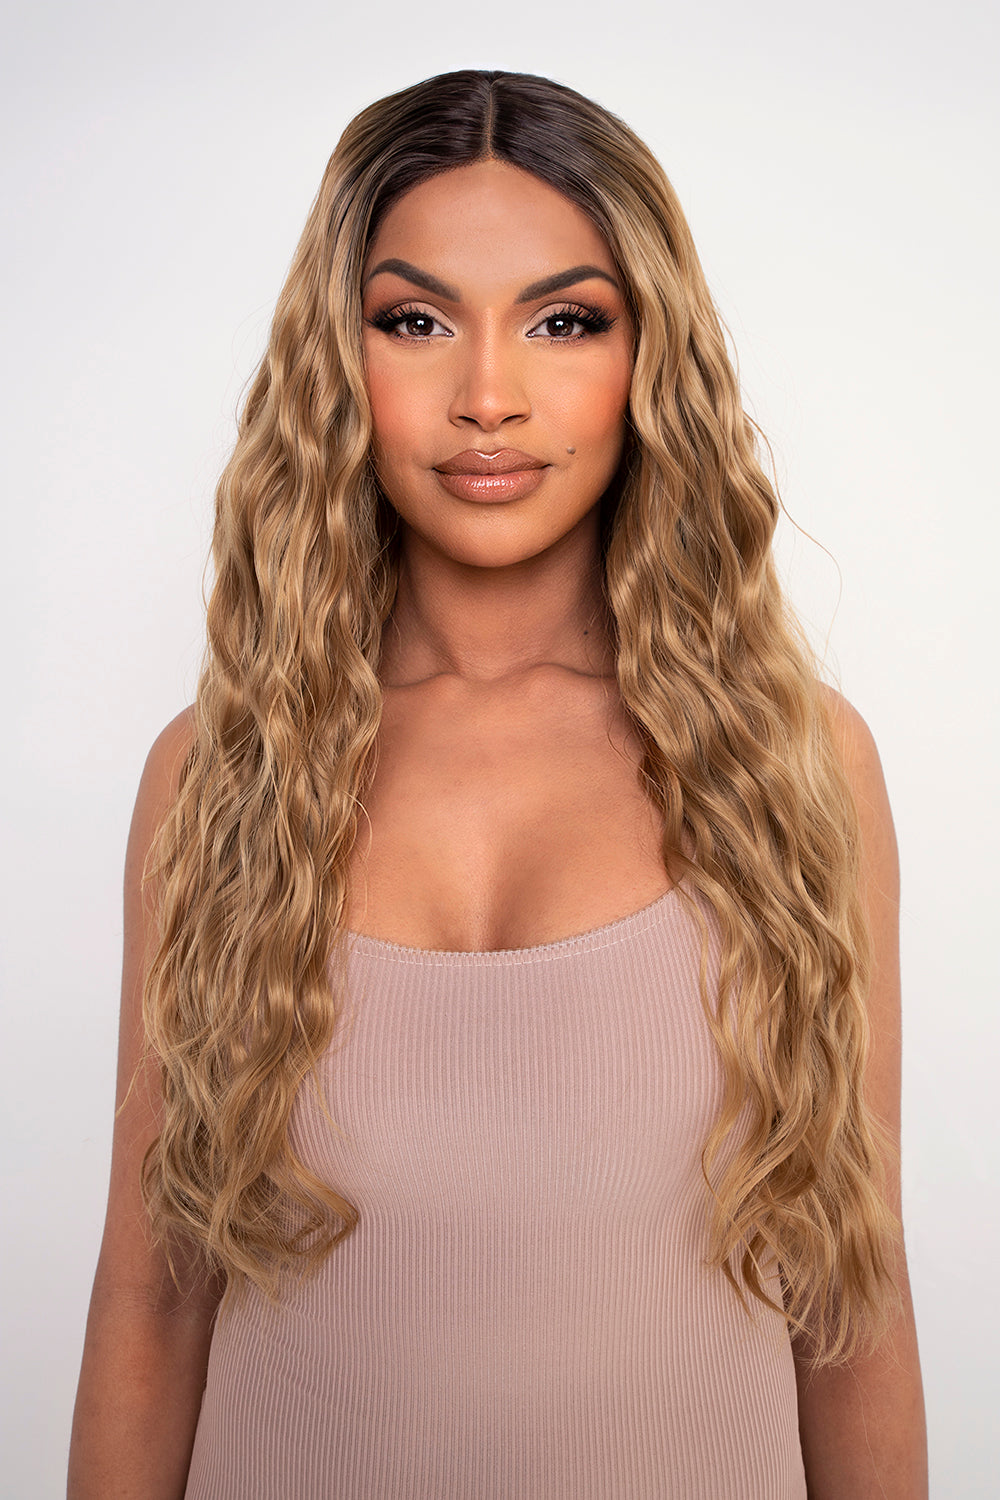 The Harley - Perruque Lace Front Doré Balayage Boho Waves